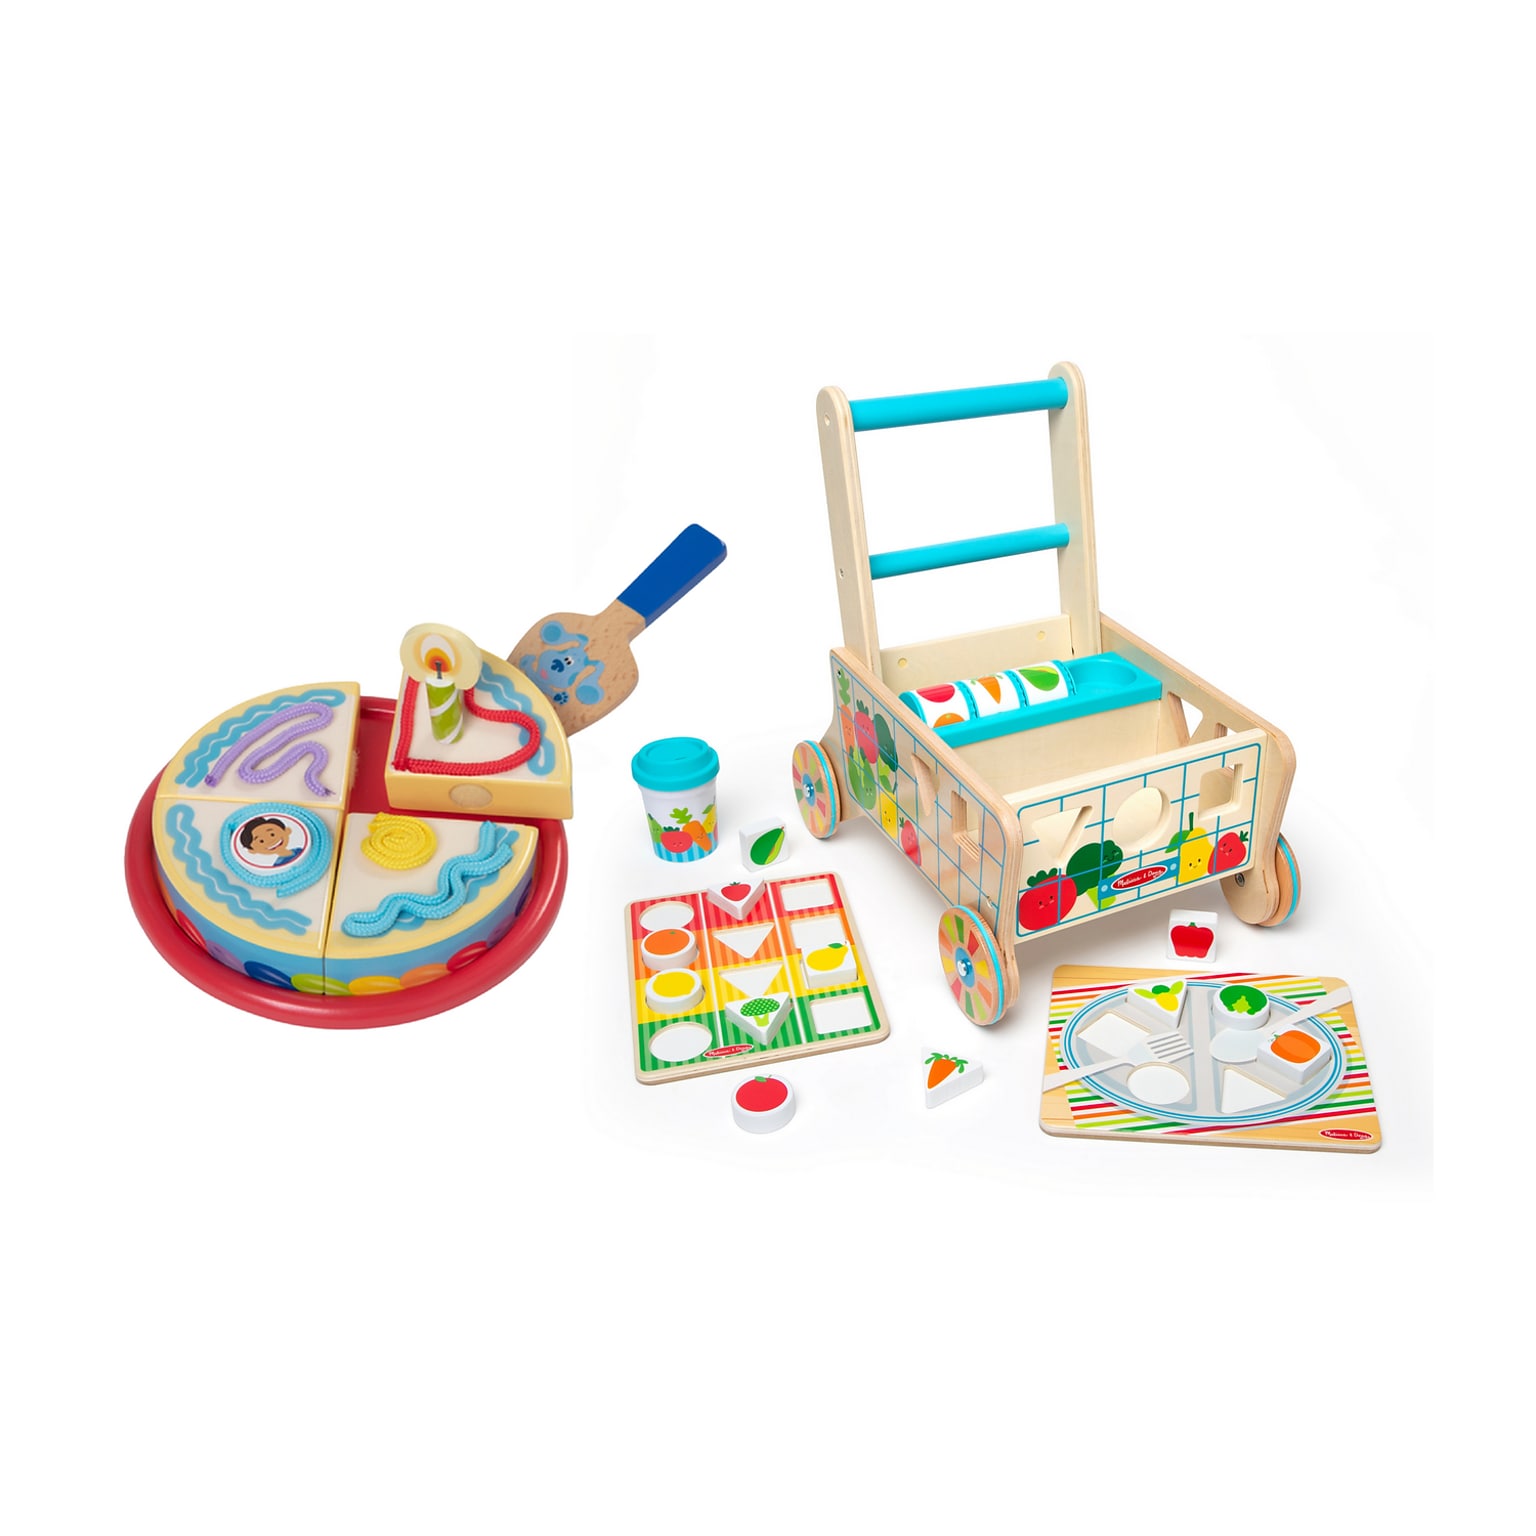 Mattel Blues Clues & You Wooden Birthday Party Play Set with Wooden Shape Sorting Grocery Cart, Multicolored (33018-30732-KIT)